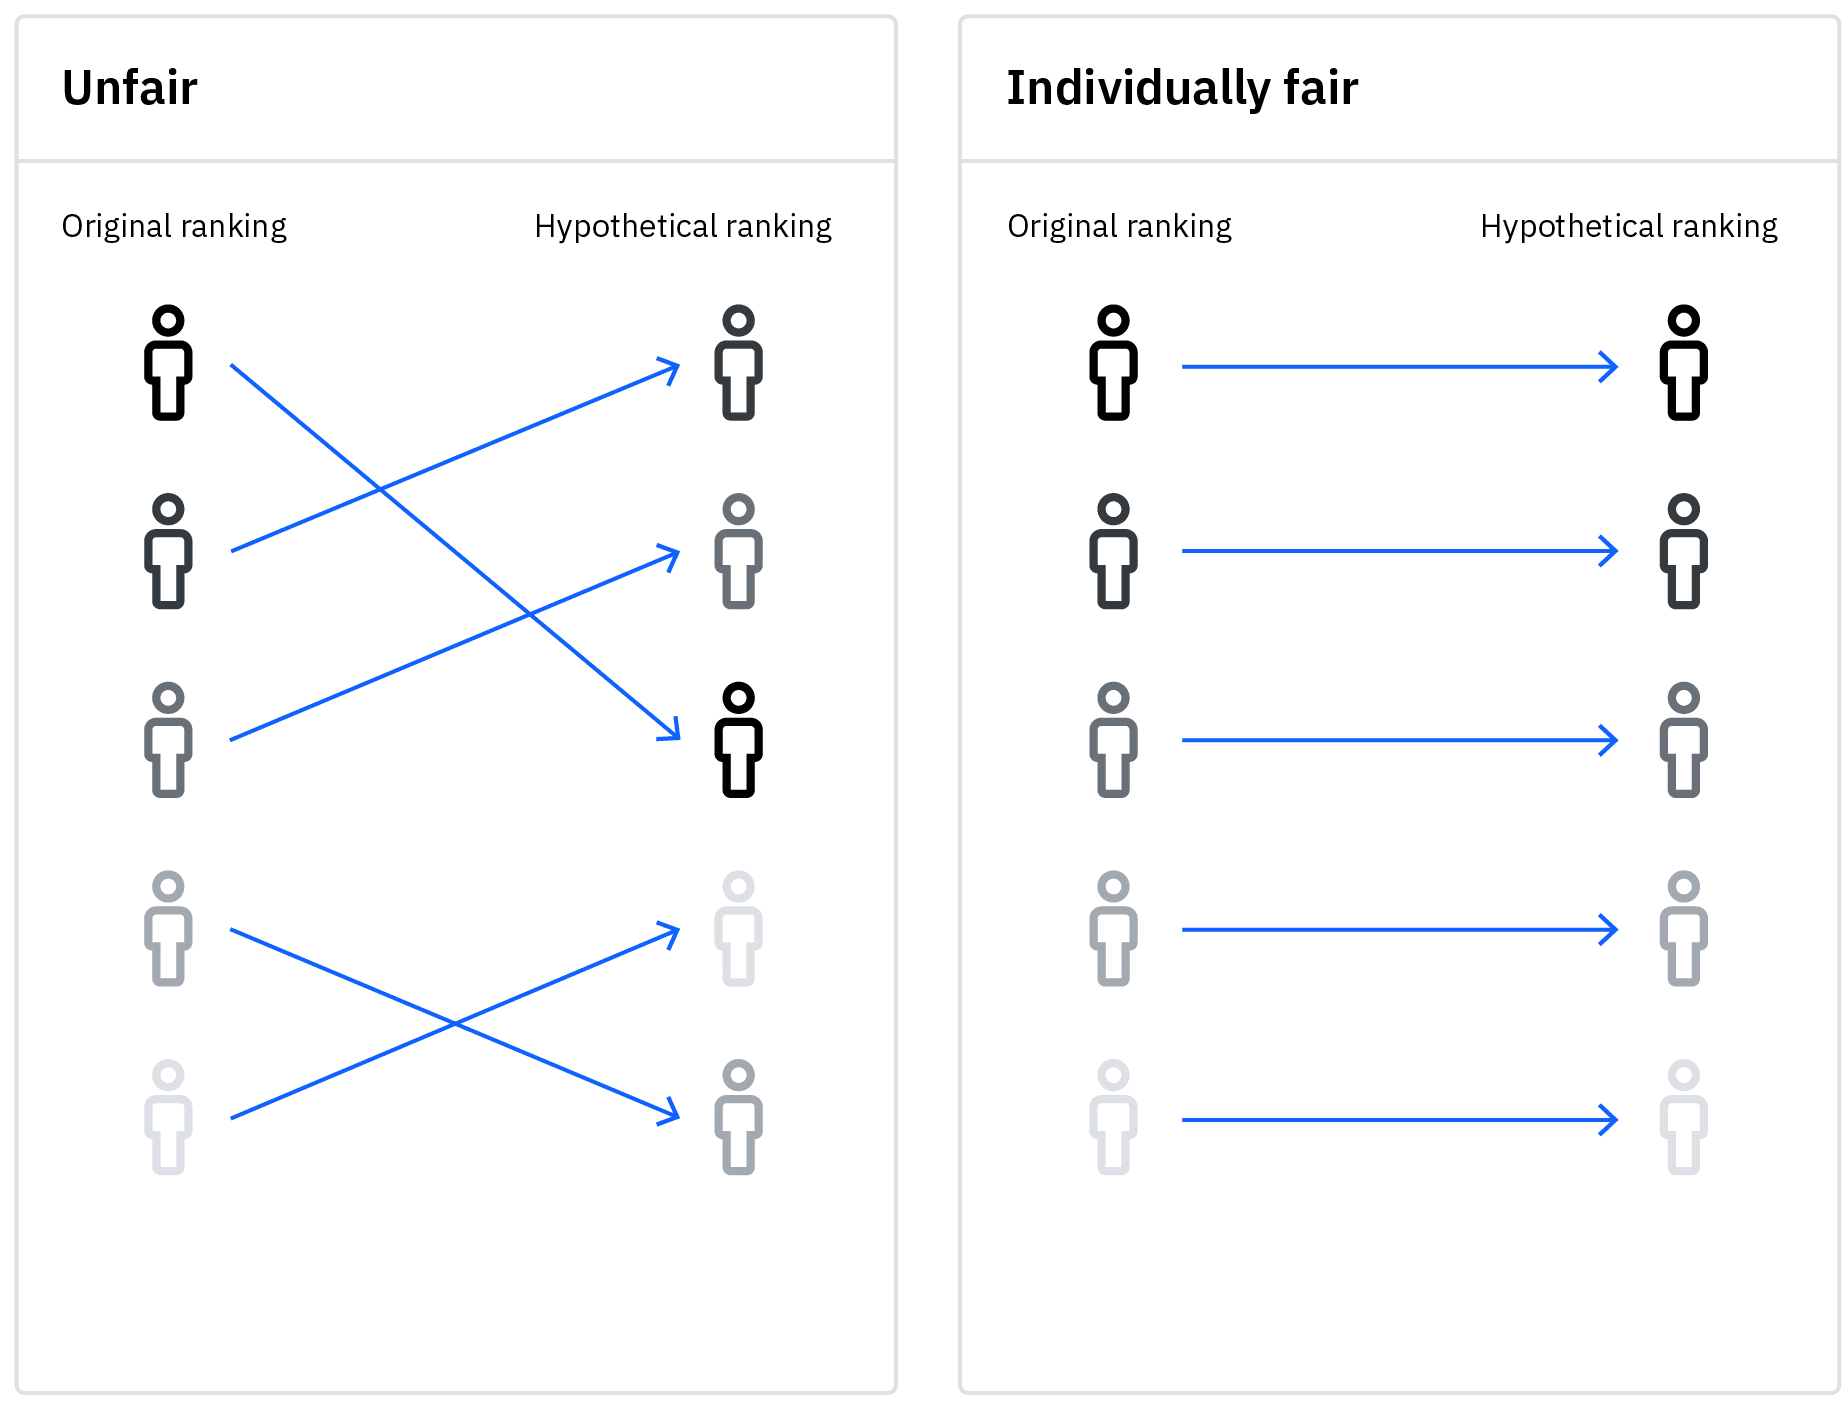 A graphic showing individual fairness in ranking